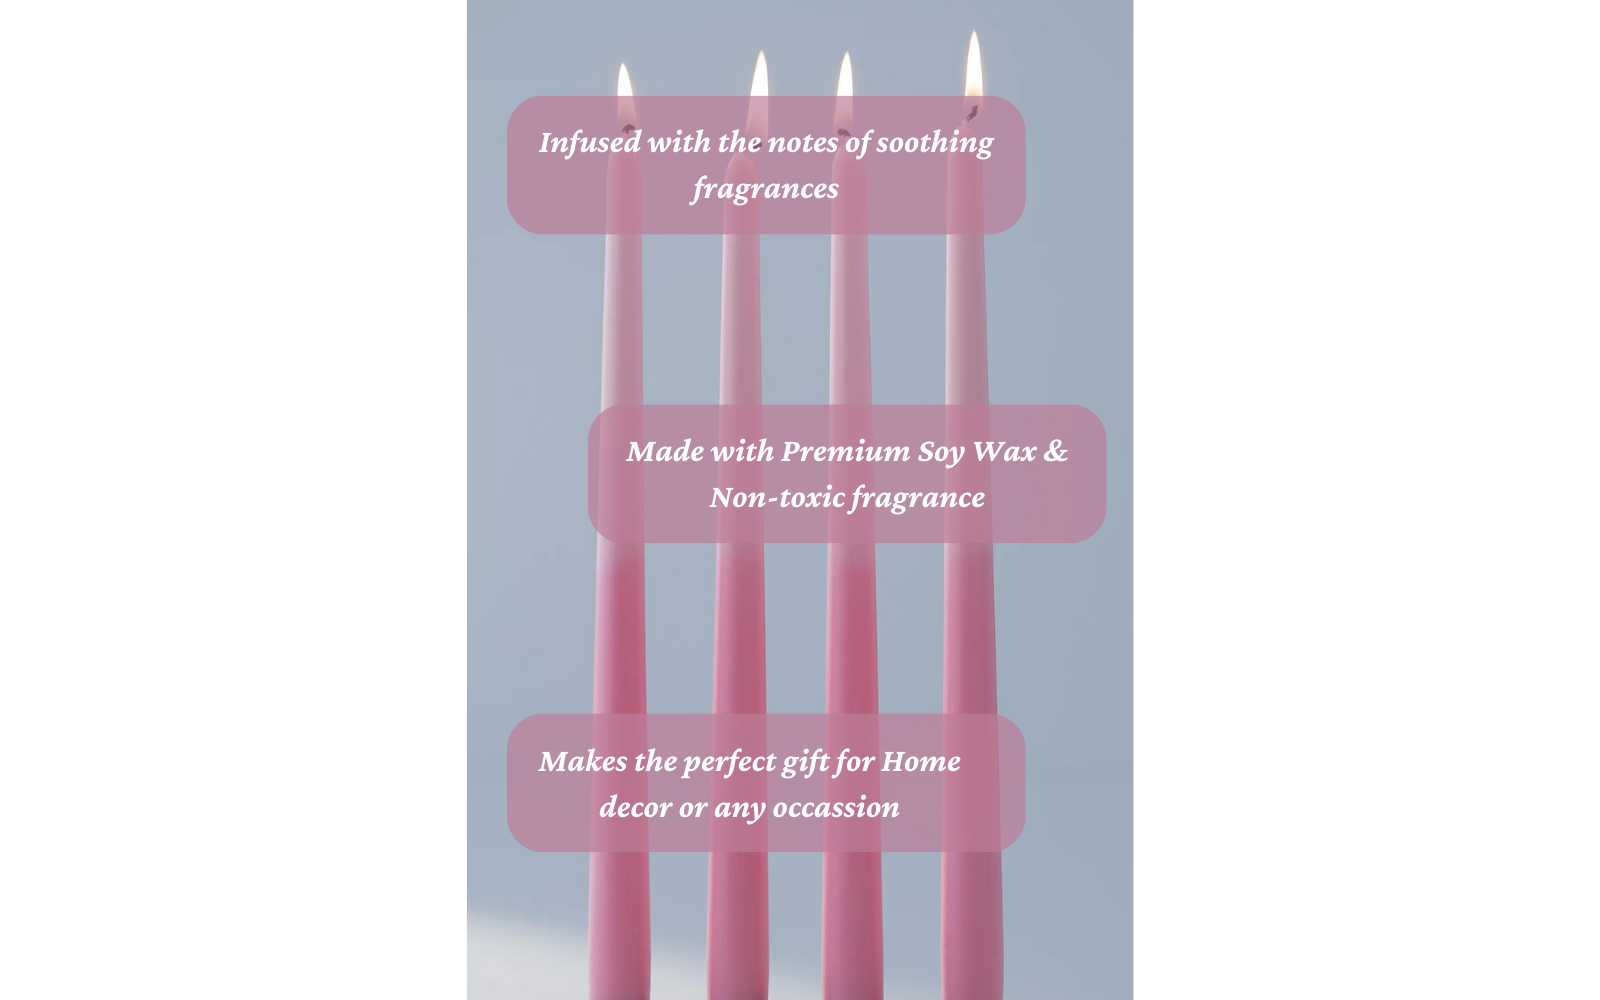 Mix & Match Tapered Candles (Pink Colored Set of 4)